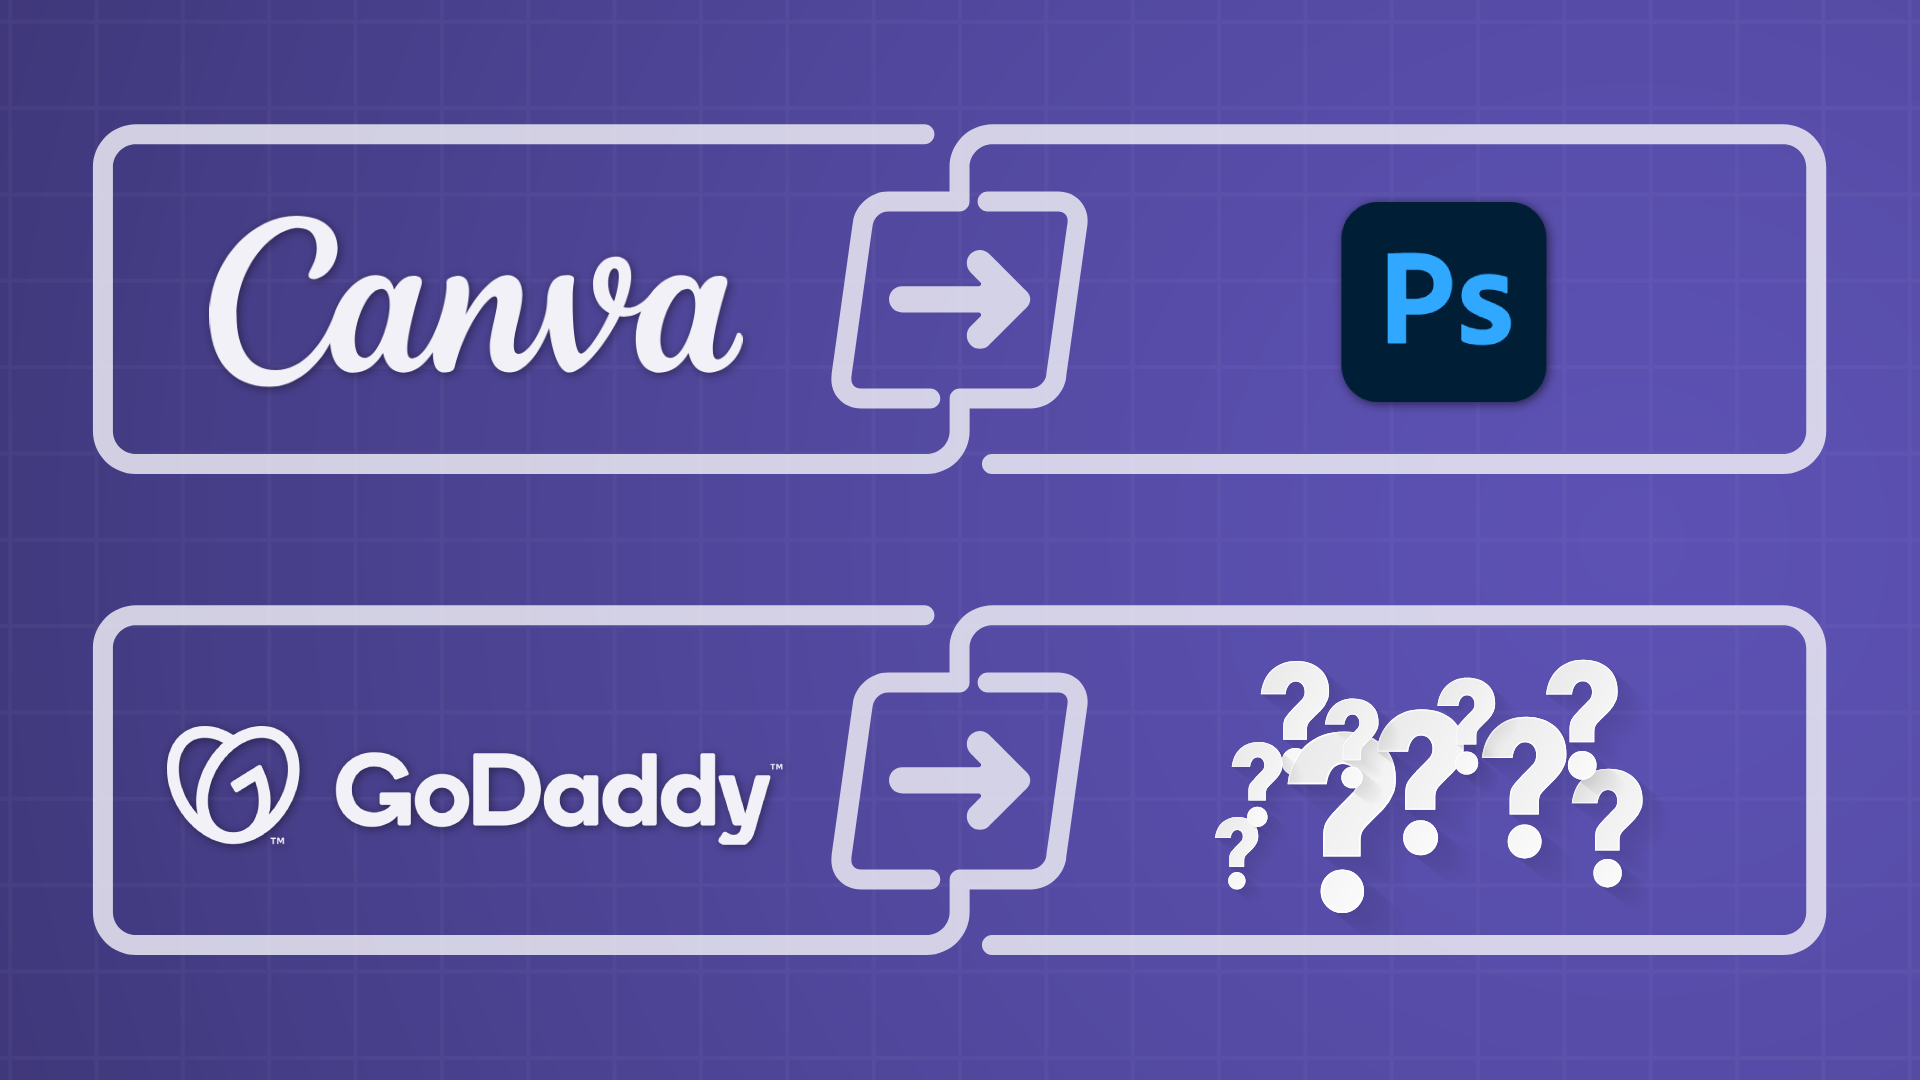 Canva is to Photoshop as GoDaddy is to...